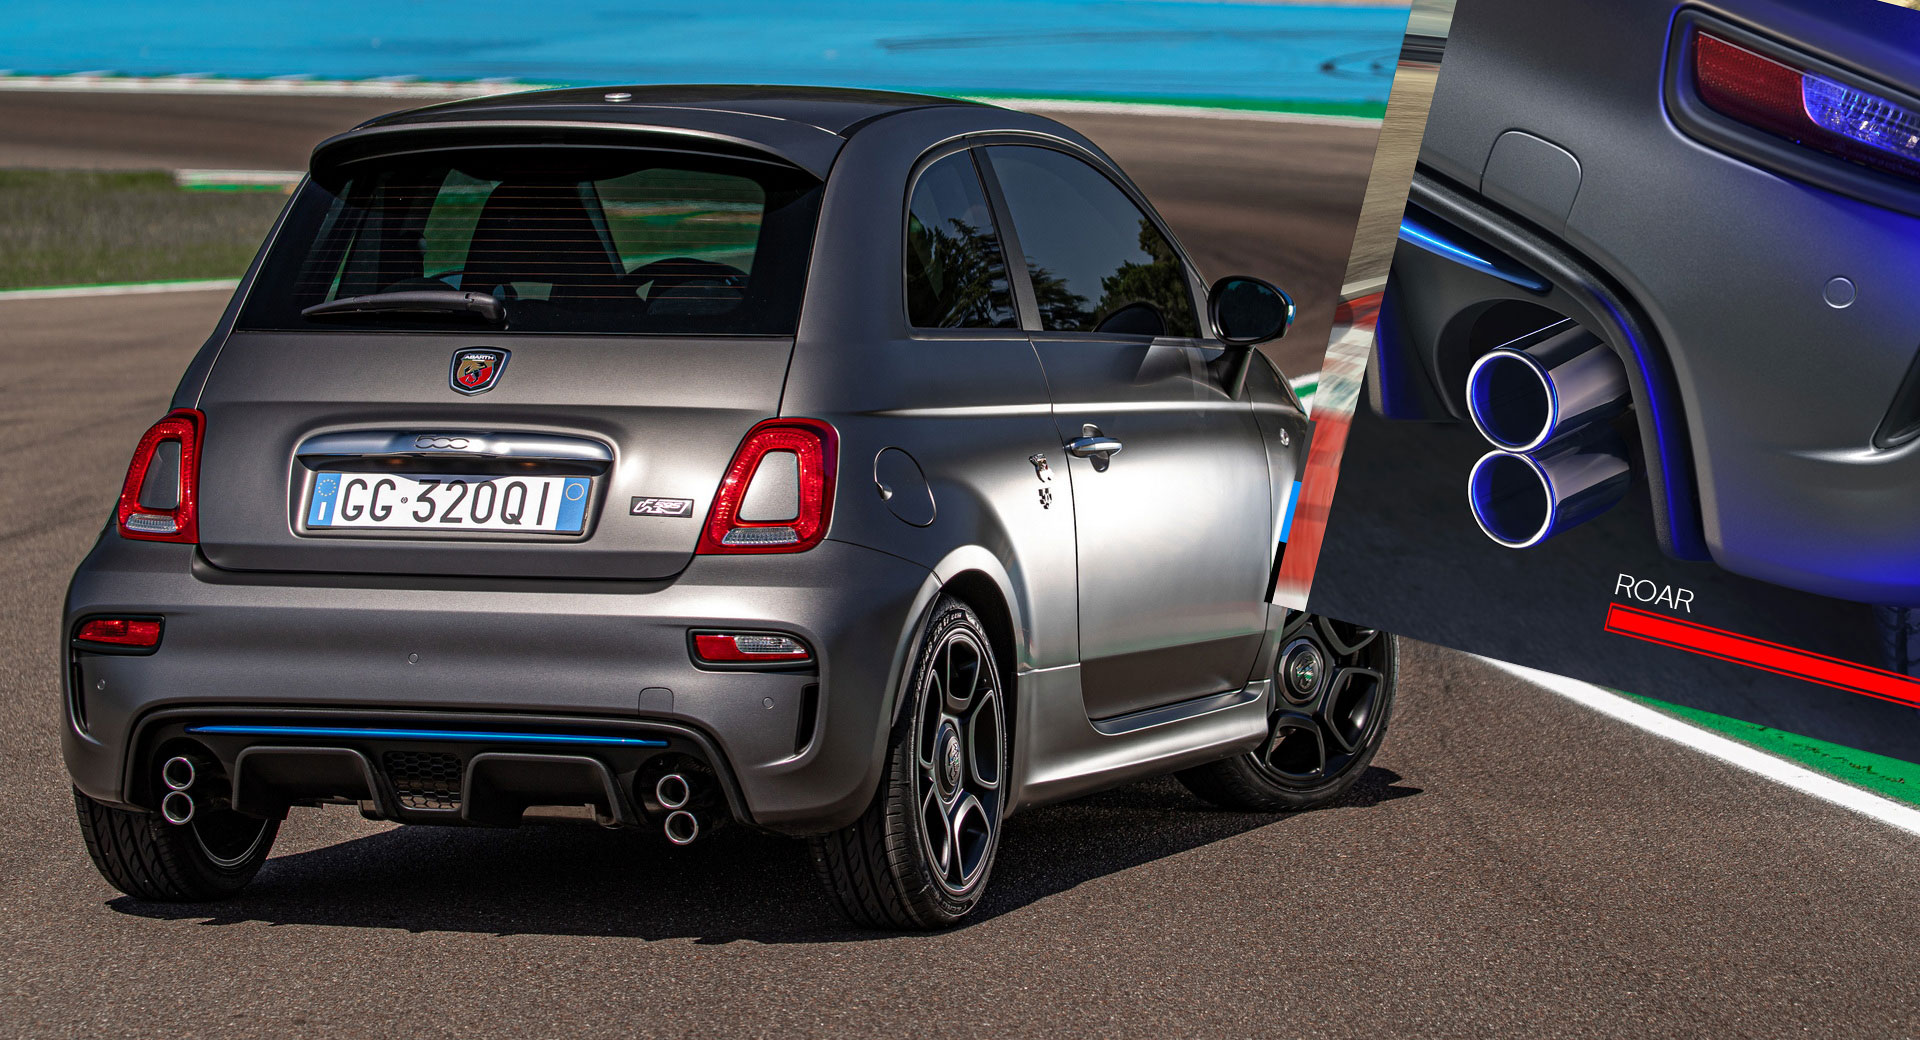 This is the new Abarth 595 hot hatchback